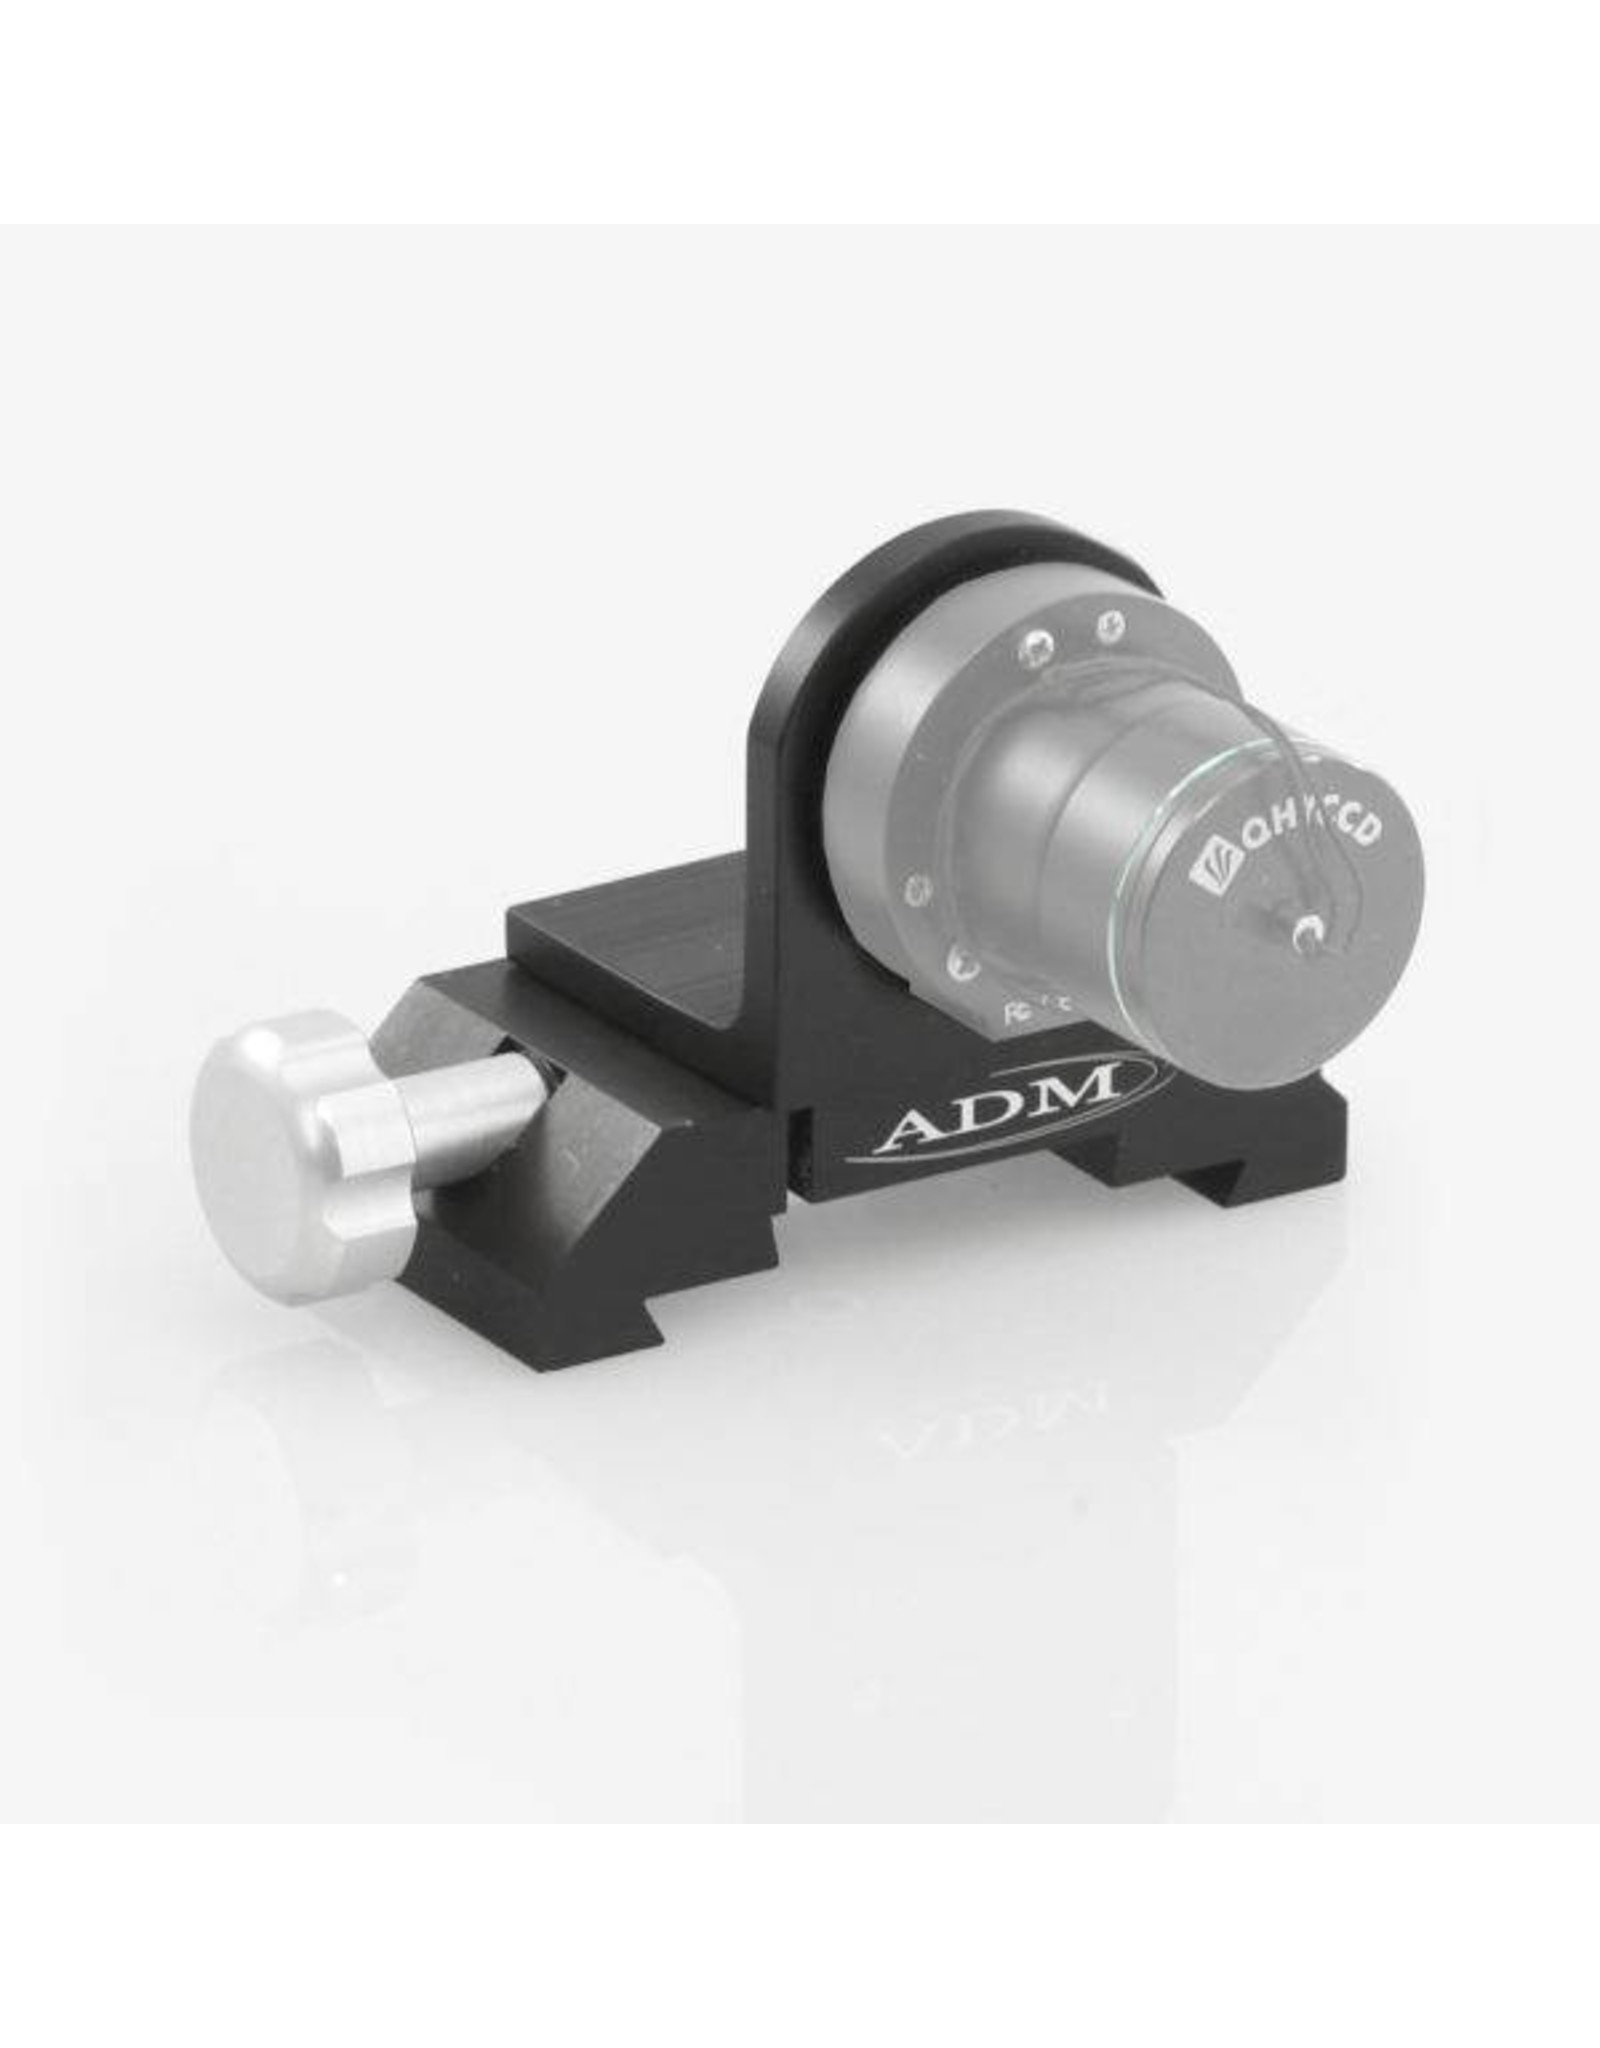 ADM ADM DVPA-POLE- DV Series Dovetail Adapter for PoleMaster Mounting